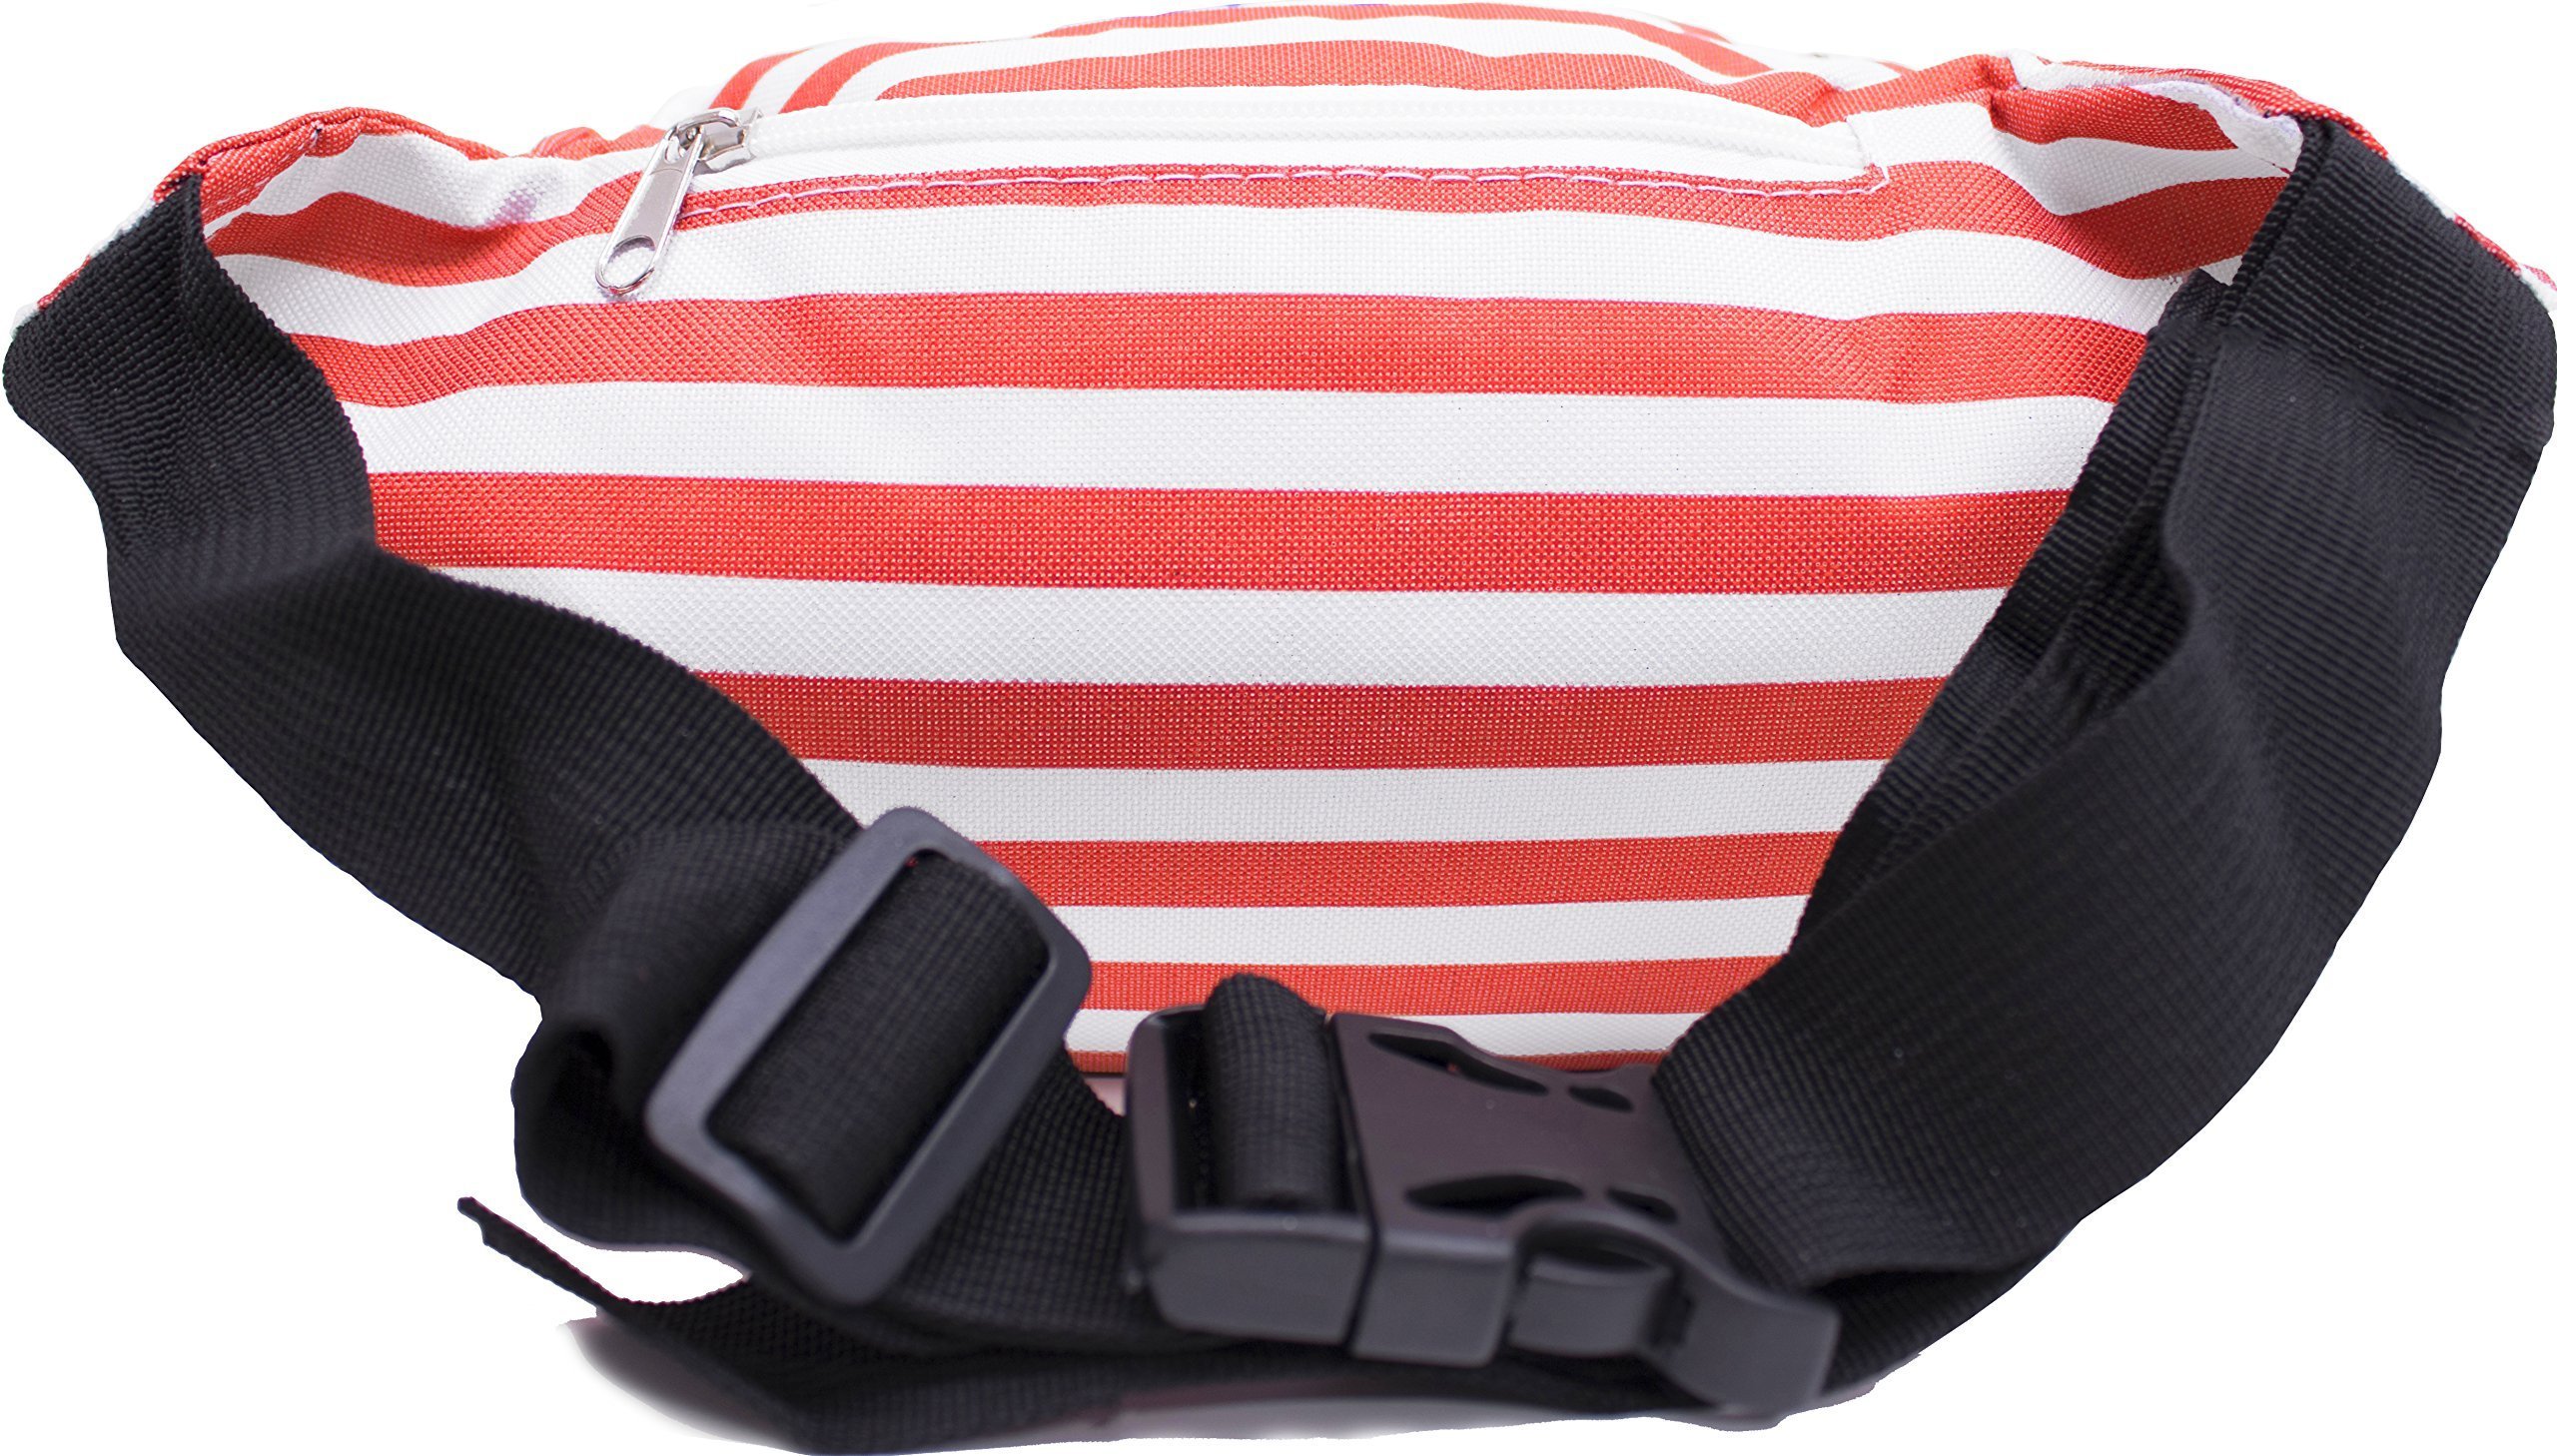 American Flag Fanny Pack I 4th of July Fanny Pack Bum Bag Crossbody - Flag Fanny Pack Waist For Halloween costumes - USA Fanny Pack for 4th of July accessories for women